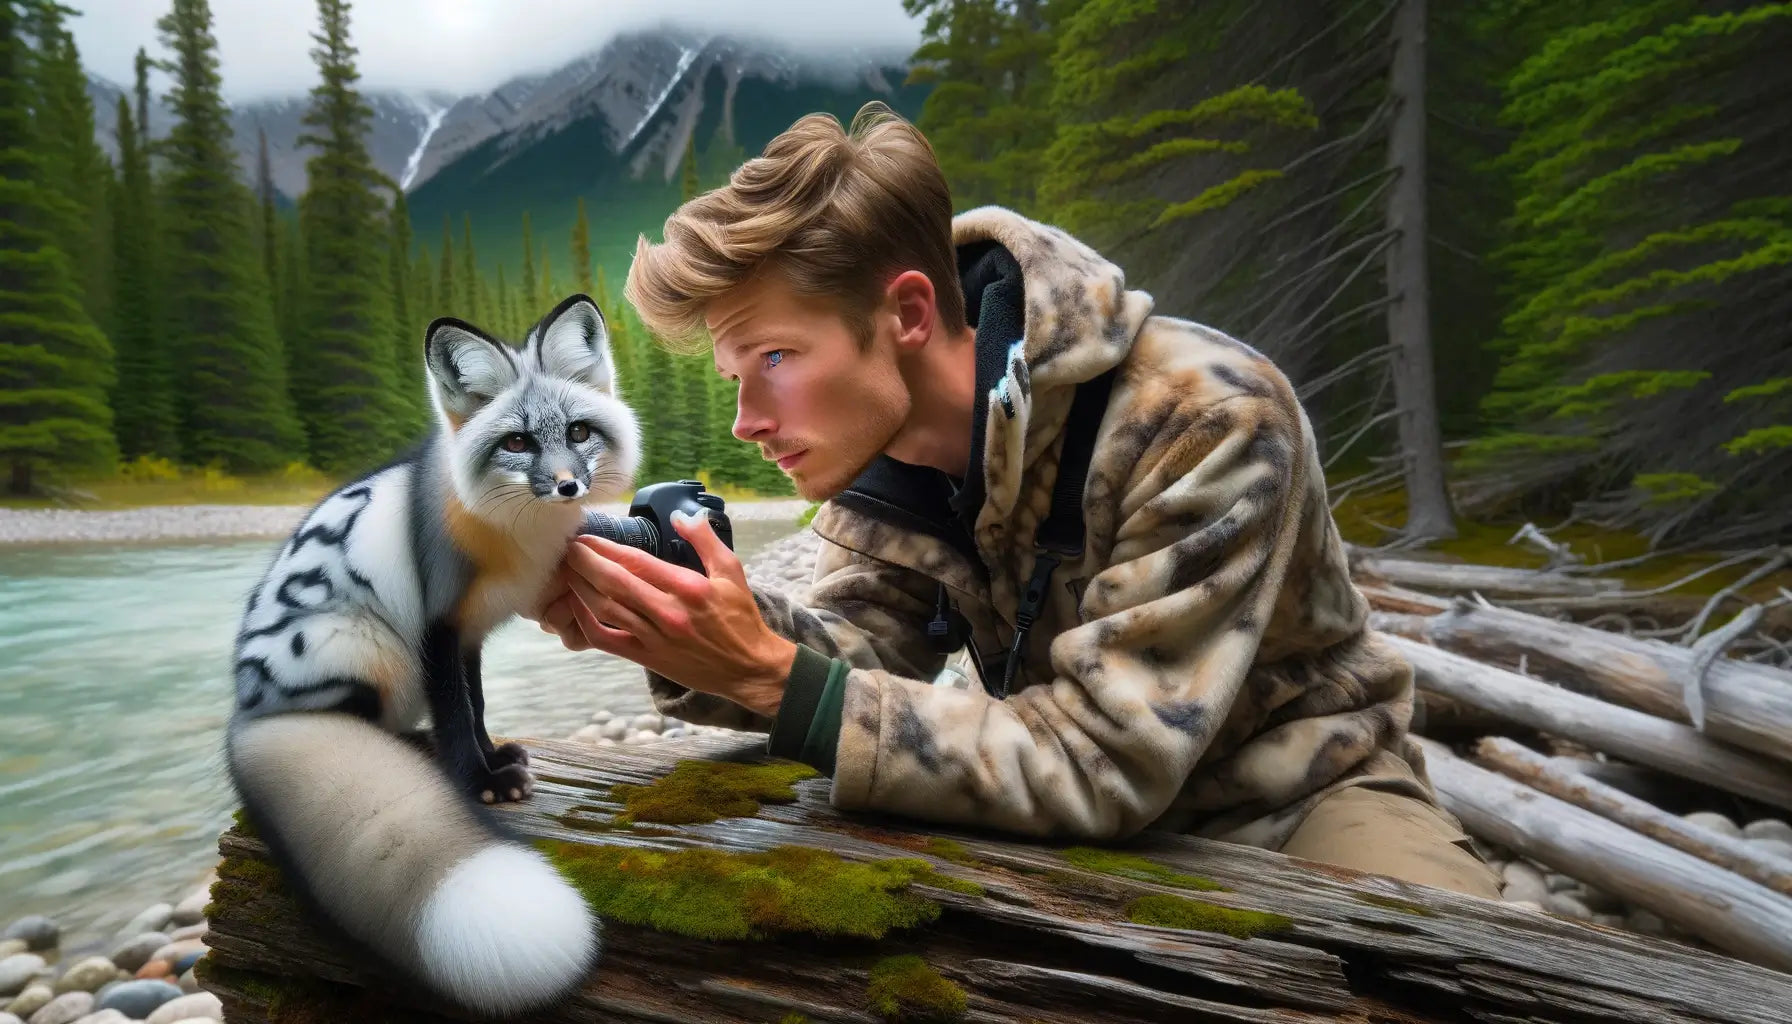 A wildlife specialist conducting a health assessment of a Canadian marble fox in a conservation area.